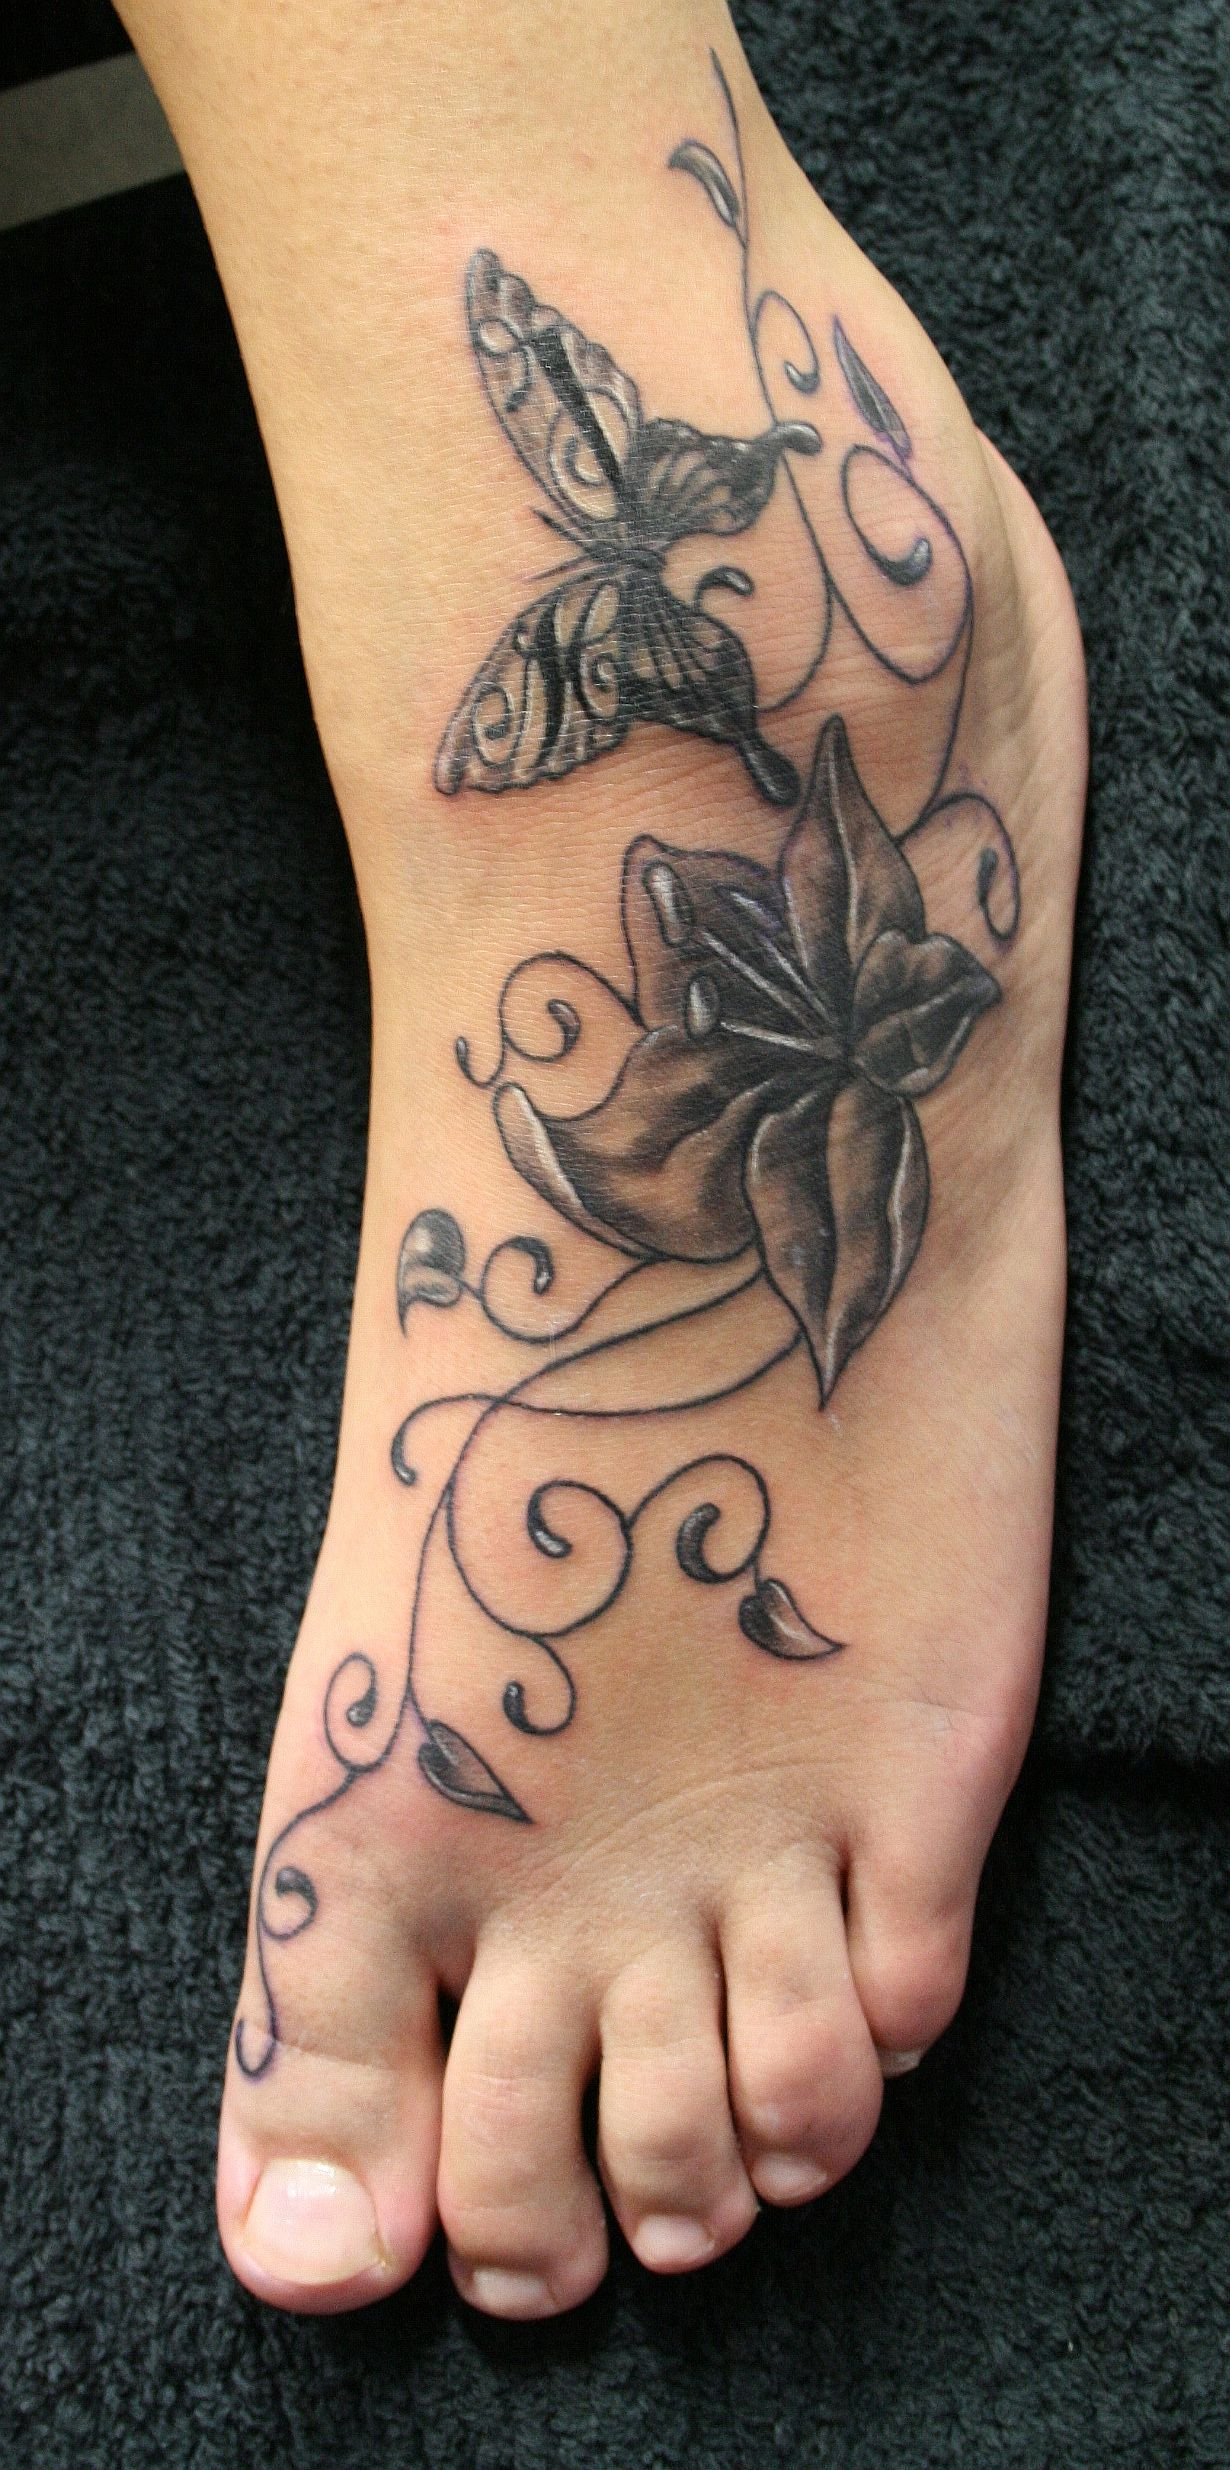 Top 10 Latest Tattoo Designs Ink Tattoos Butterfly Ankle intended for dimensions 1230 X 2470